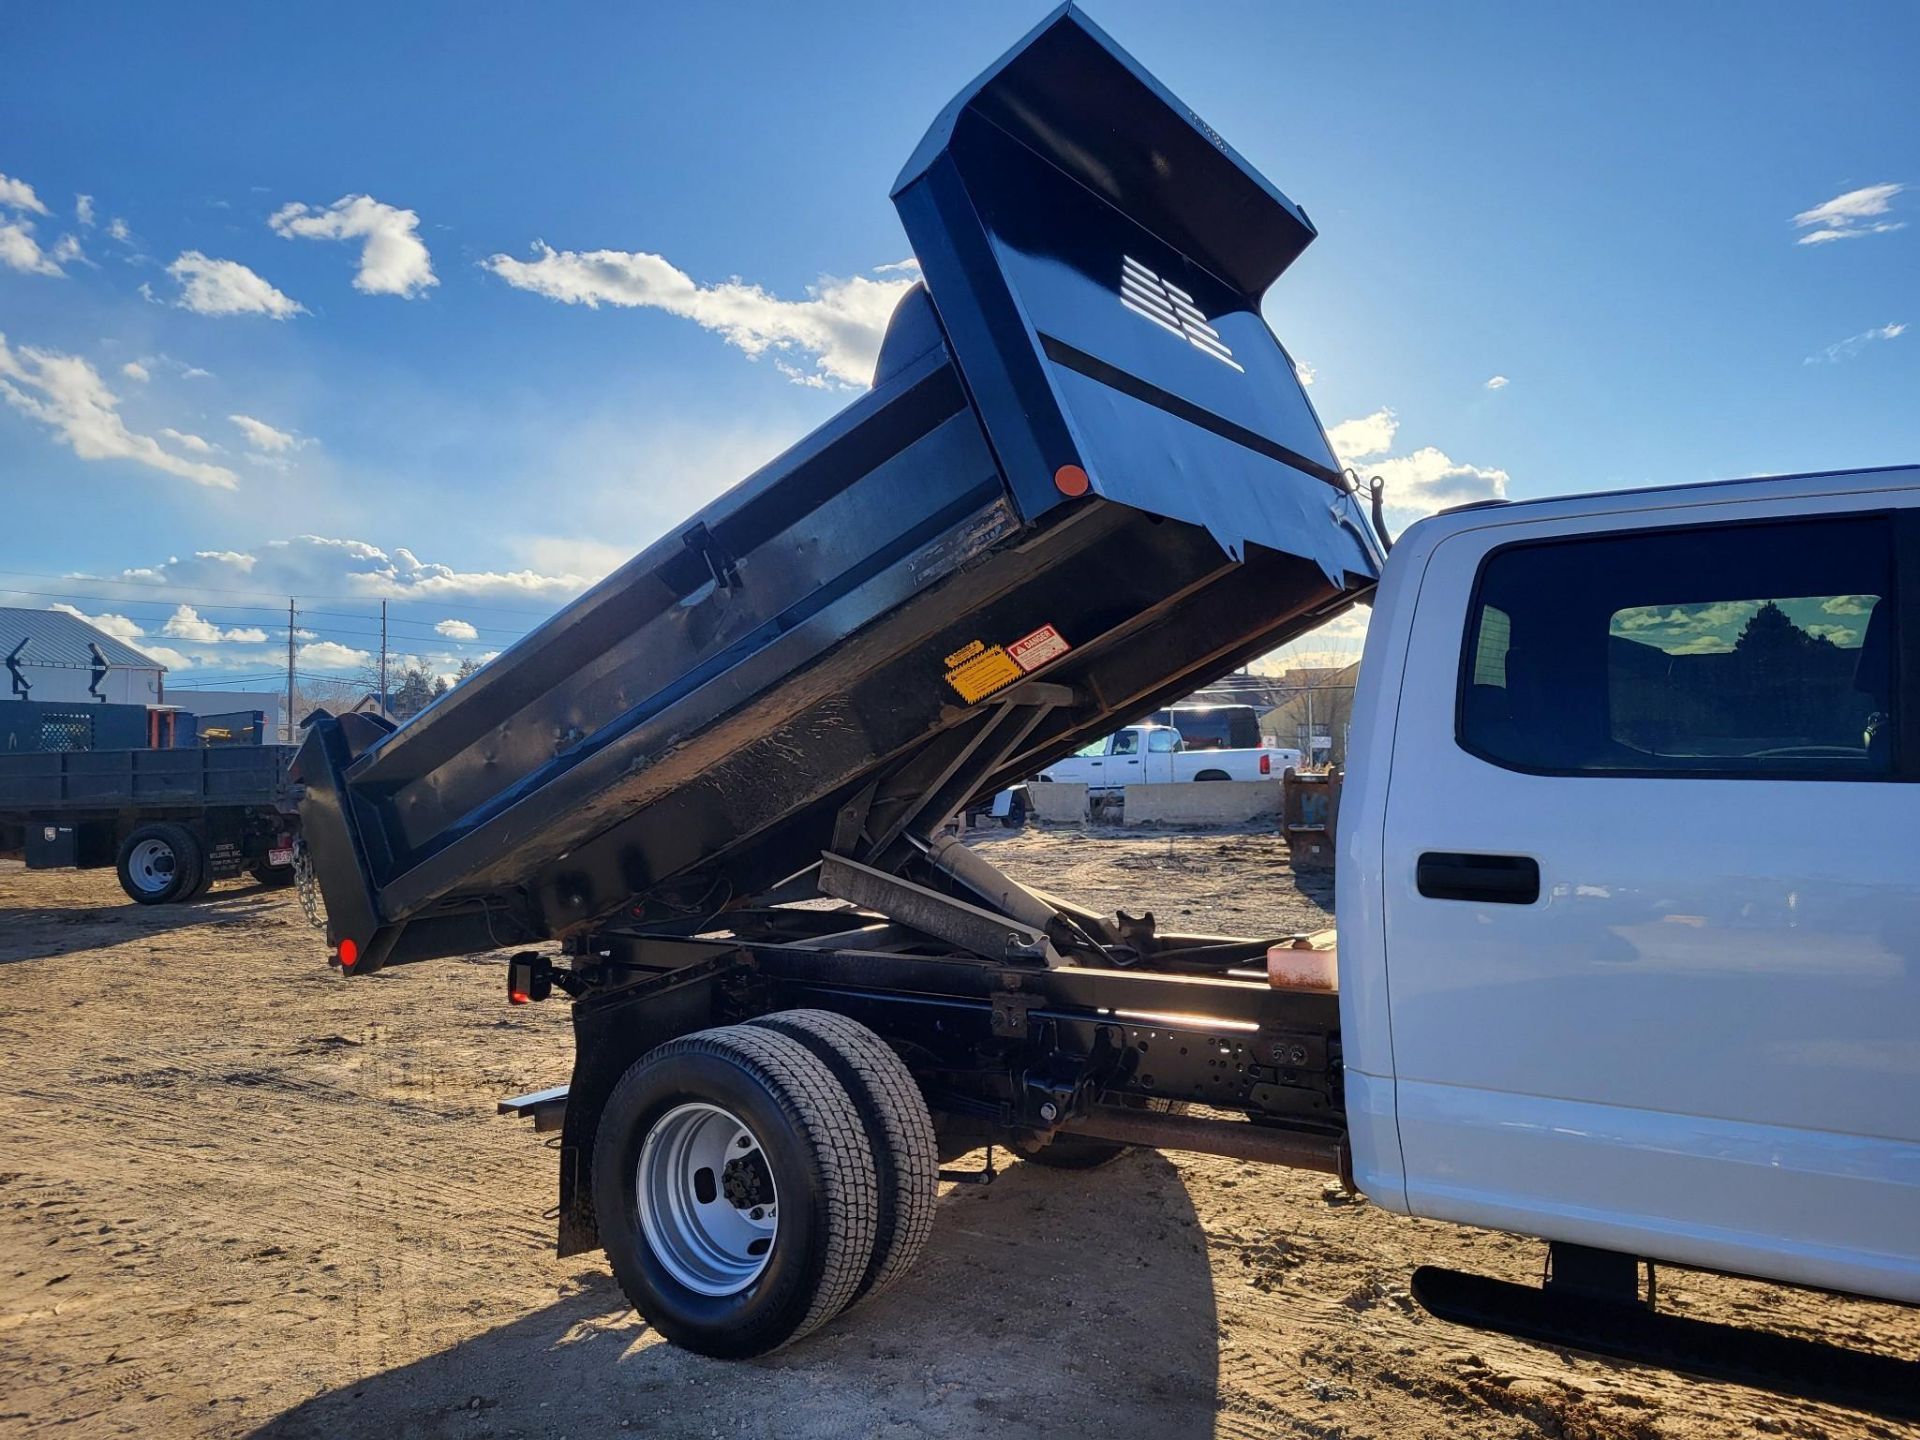 2021 FORD F350 CREW CAB DUALLY DIESEL FLATBED DUMP TRUCK 19,500 MILES! - Image 32 of 37